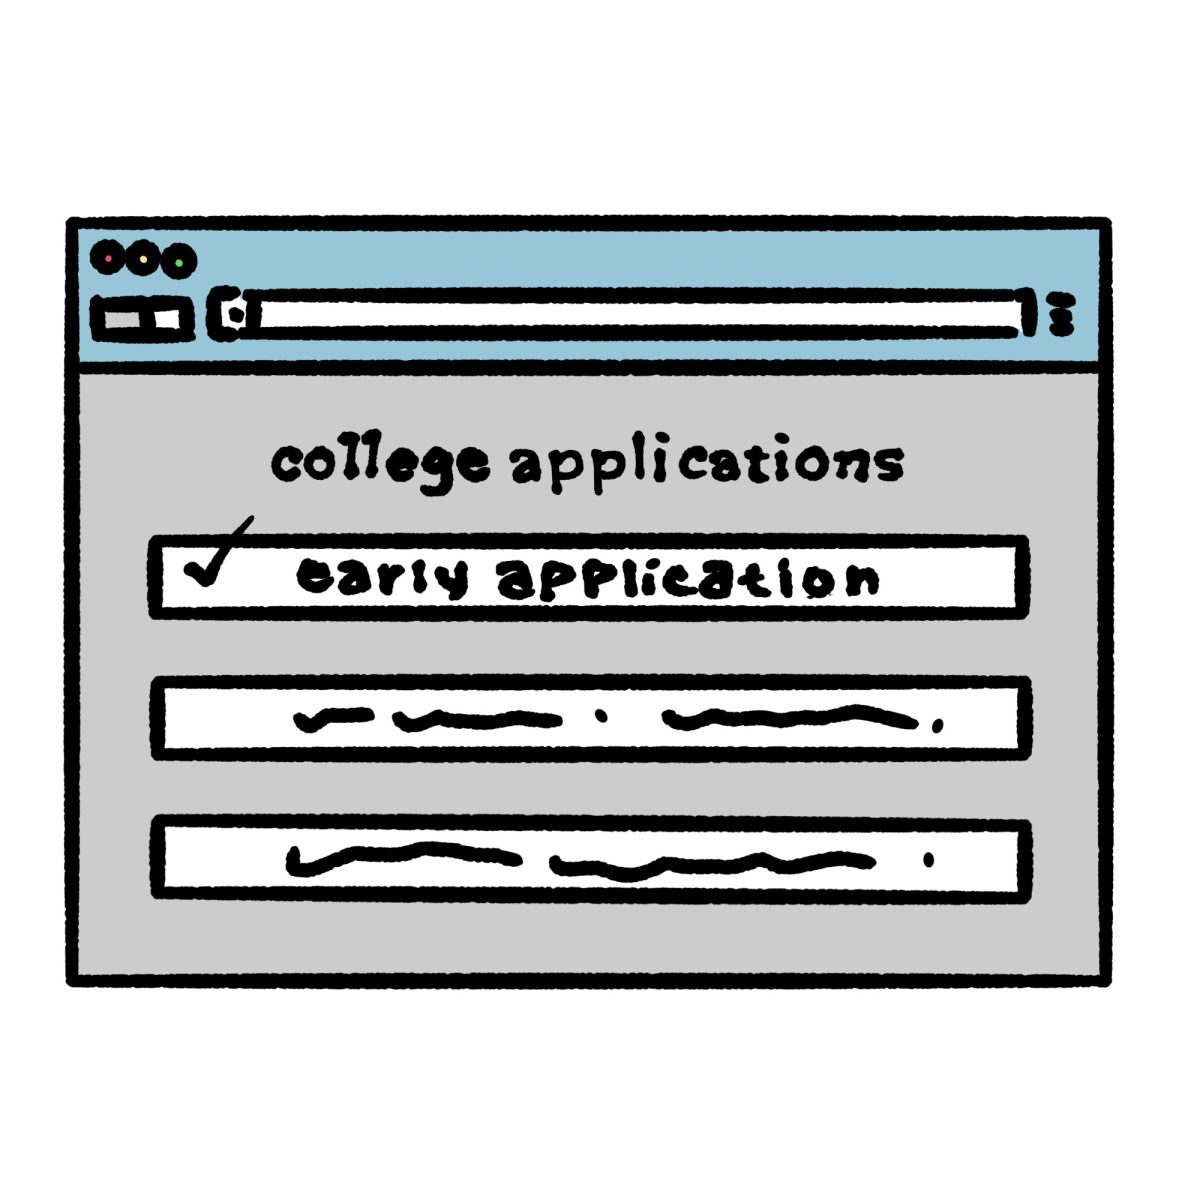 Although+seniors+must+select+whether+they+would+like+to+apply+early+decision%2C+early+action+or+regular+before+submitting+a+college+application%2C+they+can+change+their+application+type+up+to+the+application+deadline.